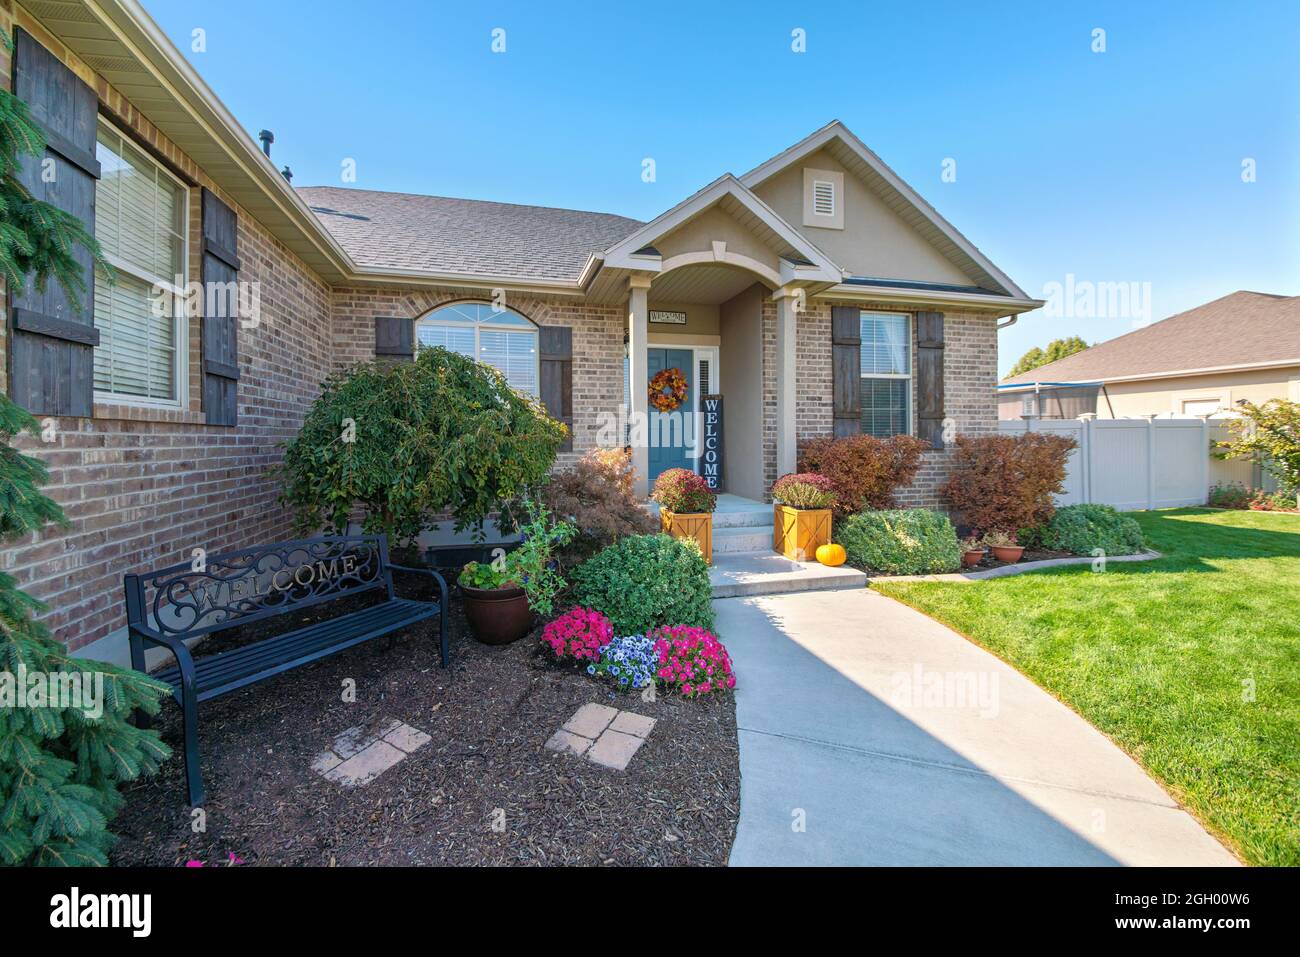 Front exterior of a house with bricks and decorated gary front door Stock Photo